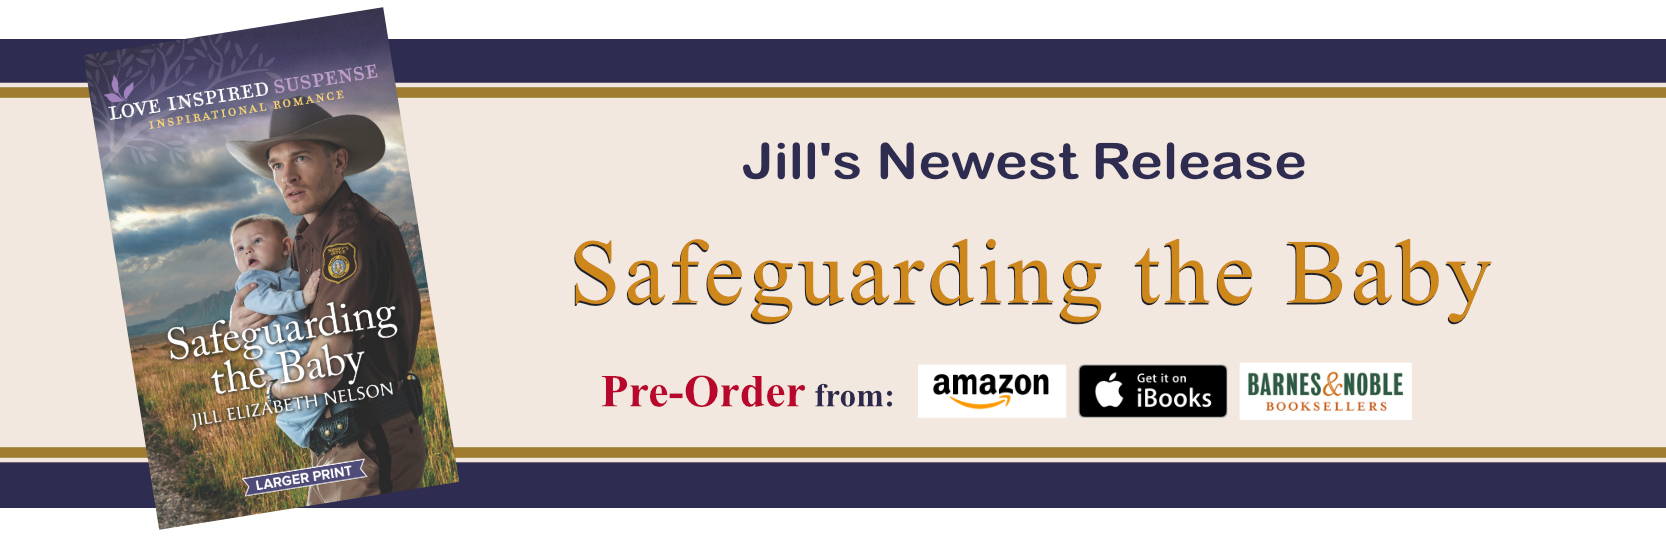 Read about Jill Elizabeth Nelson's Newest Book, Safeguarding the Baby!